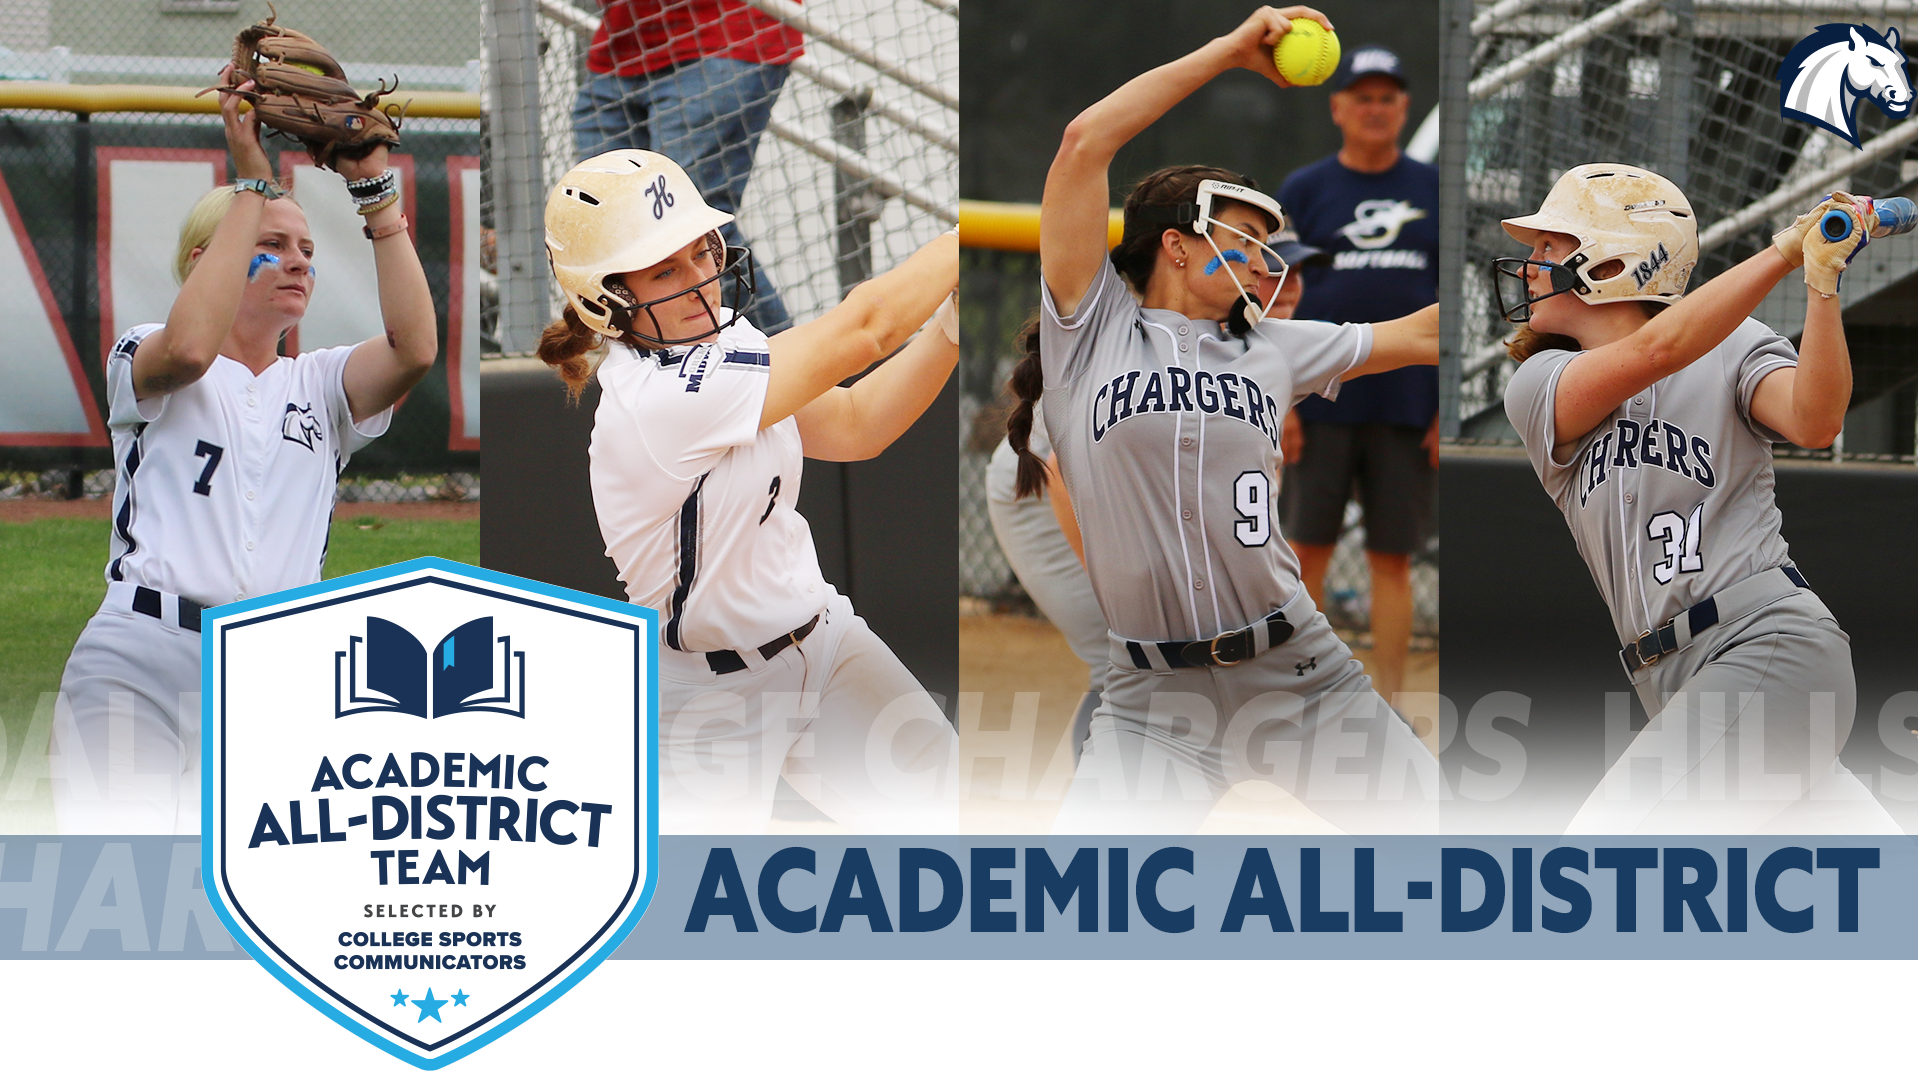 Four Chargers softball players earn CSC Academic All-District honors